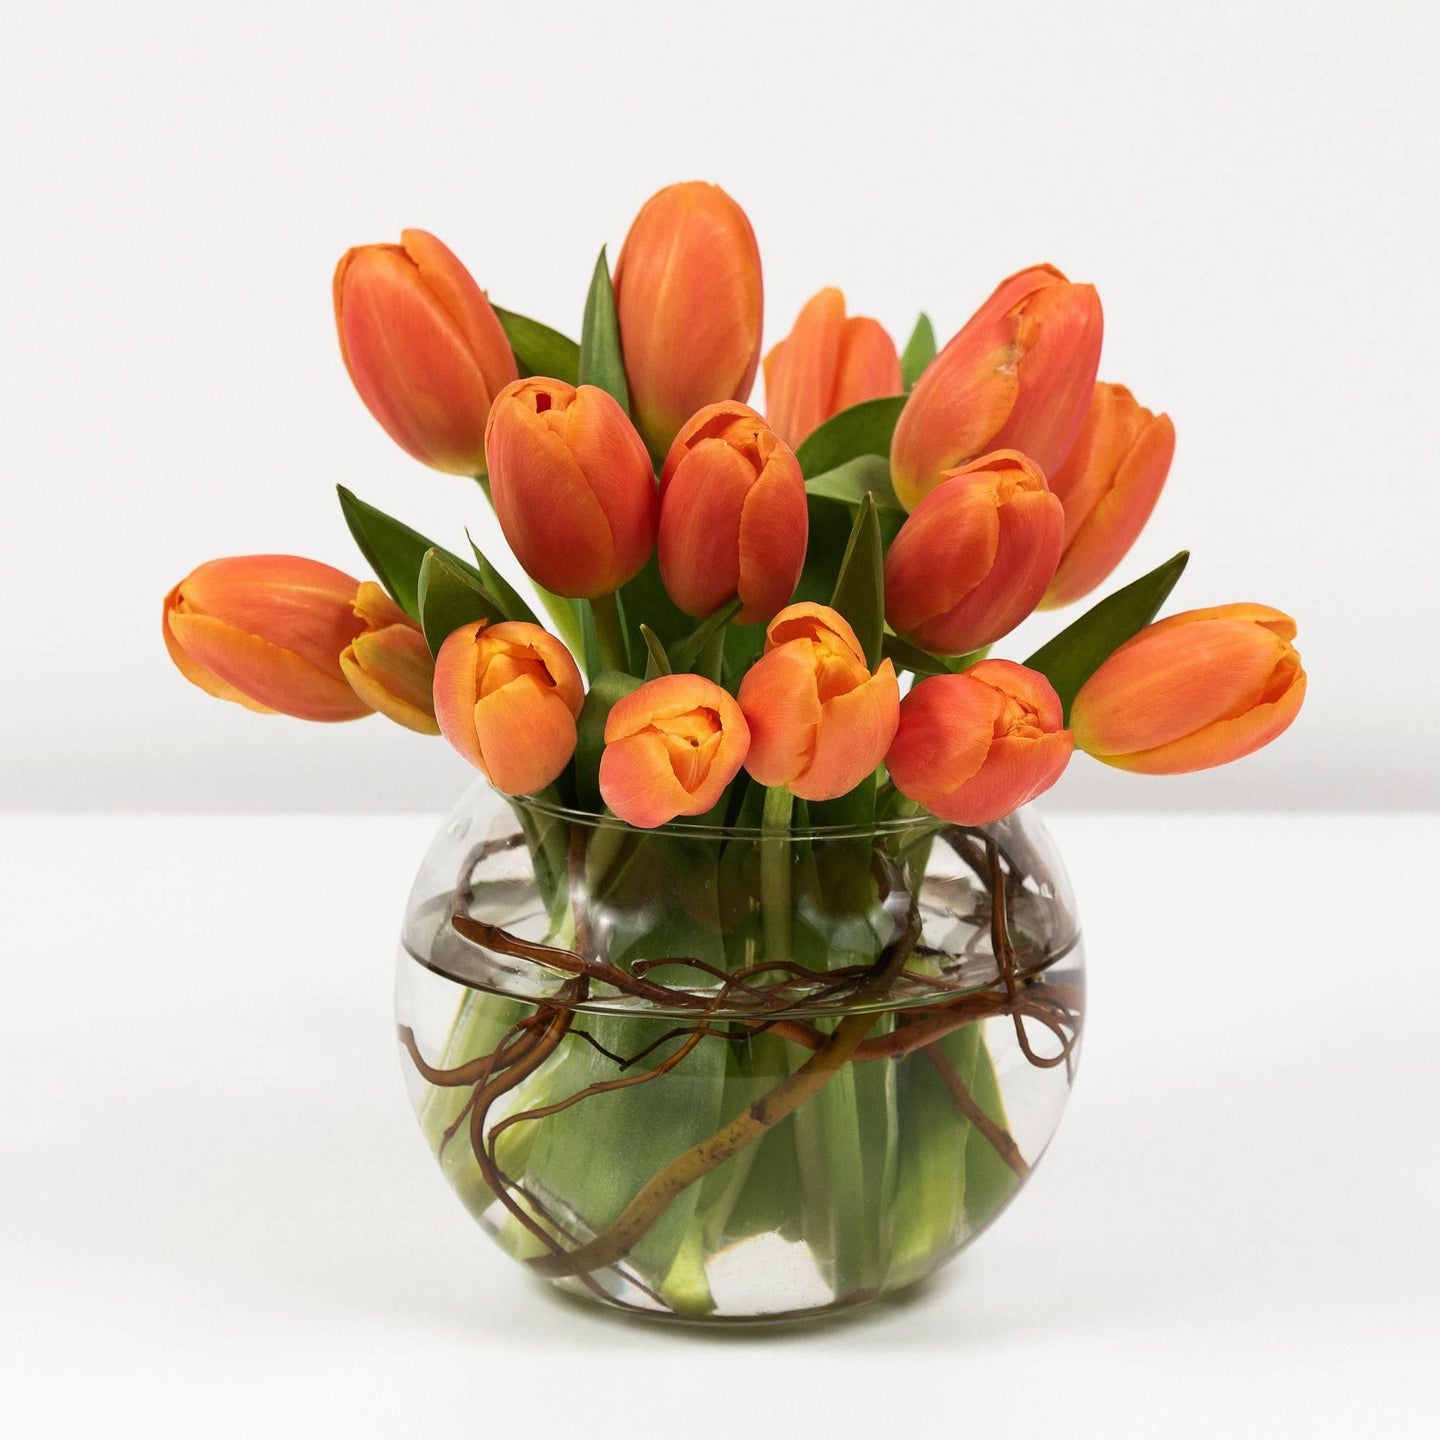 Tulips - Village Floral Designs and Gifts